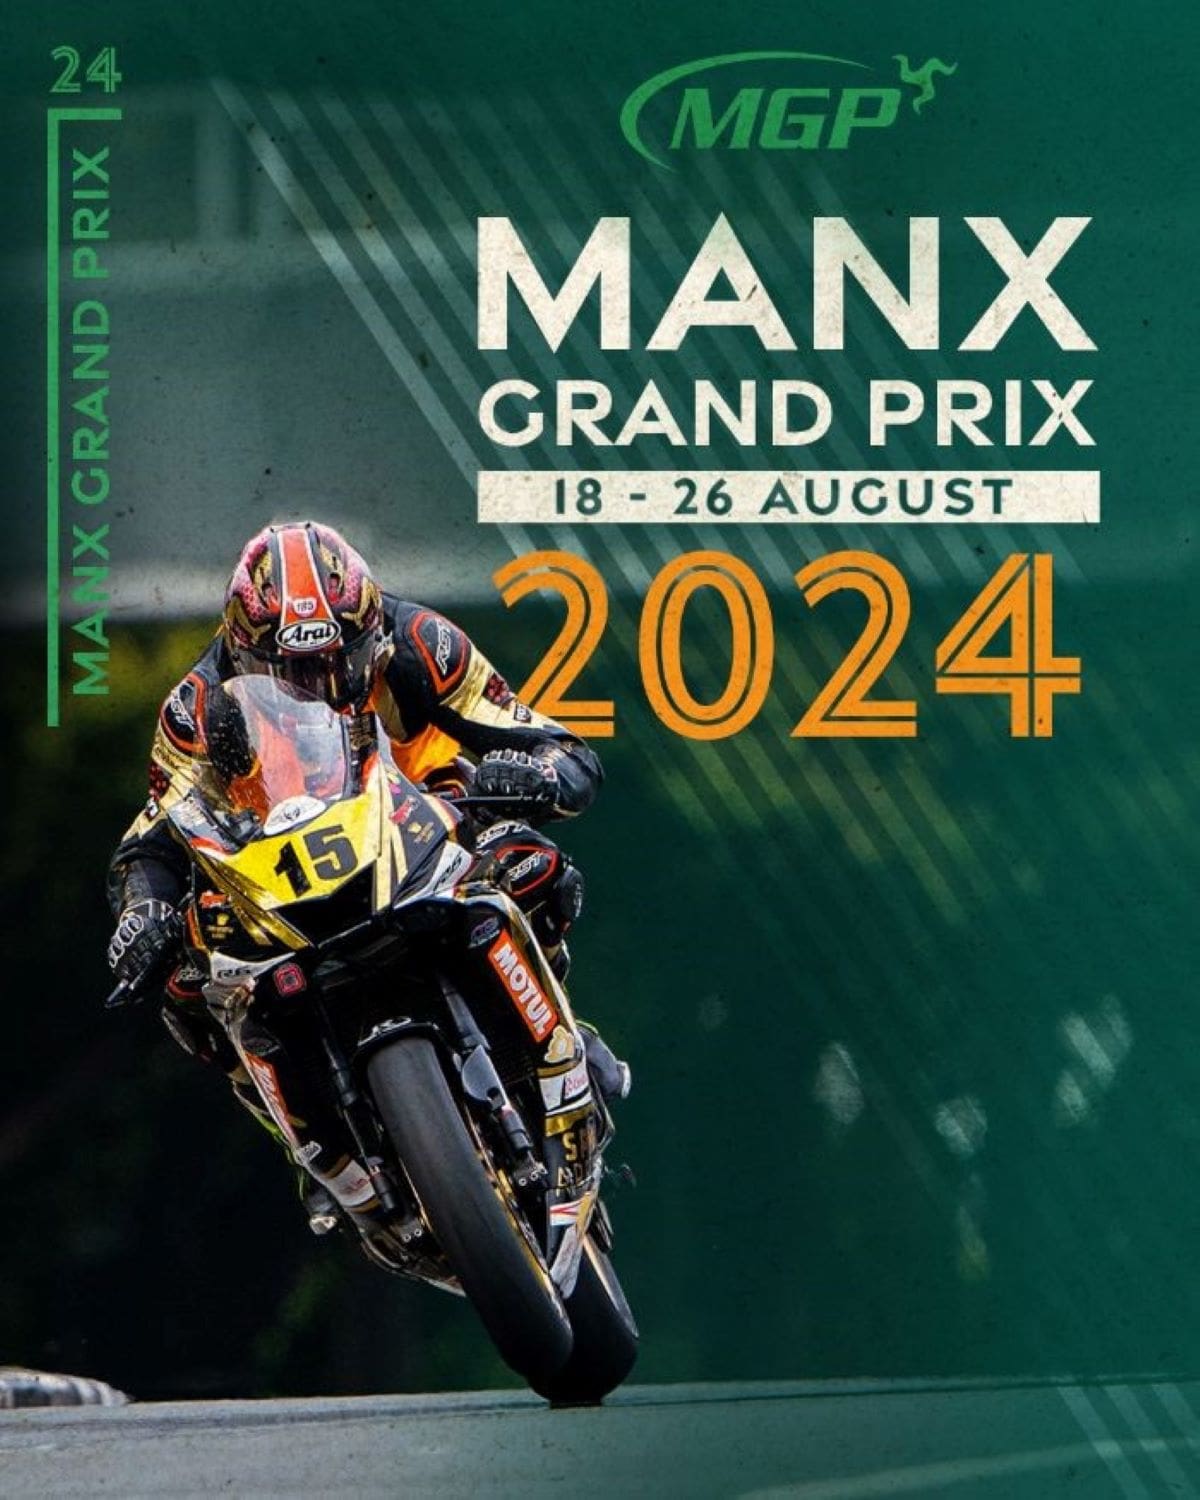 Dates introduced for 2024 Manx Grand Prix